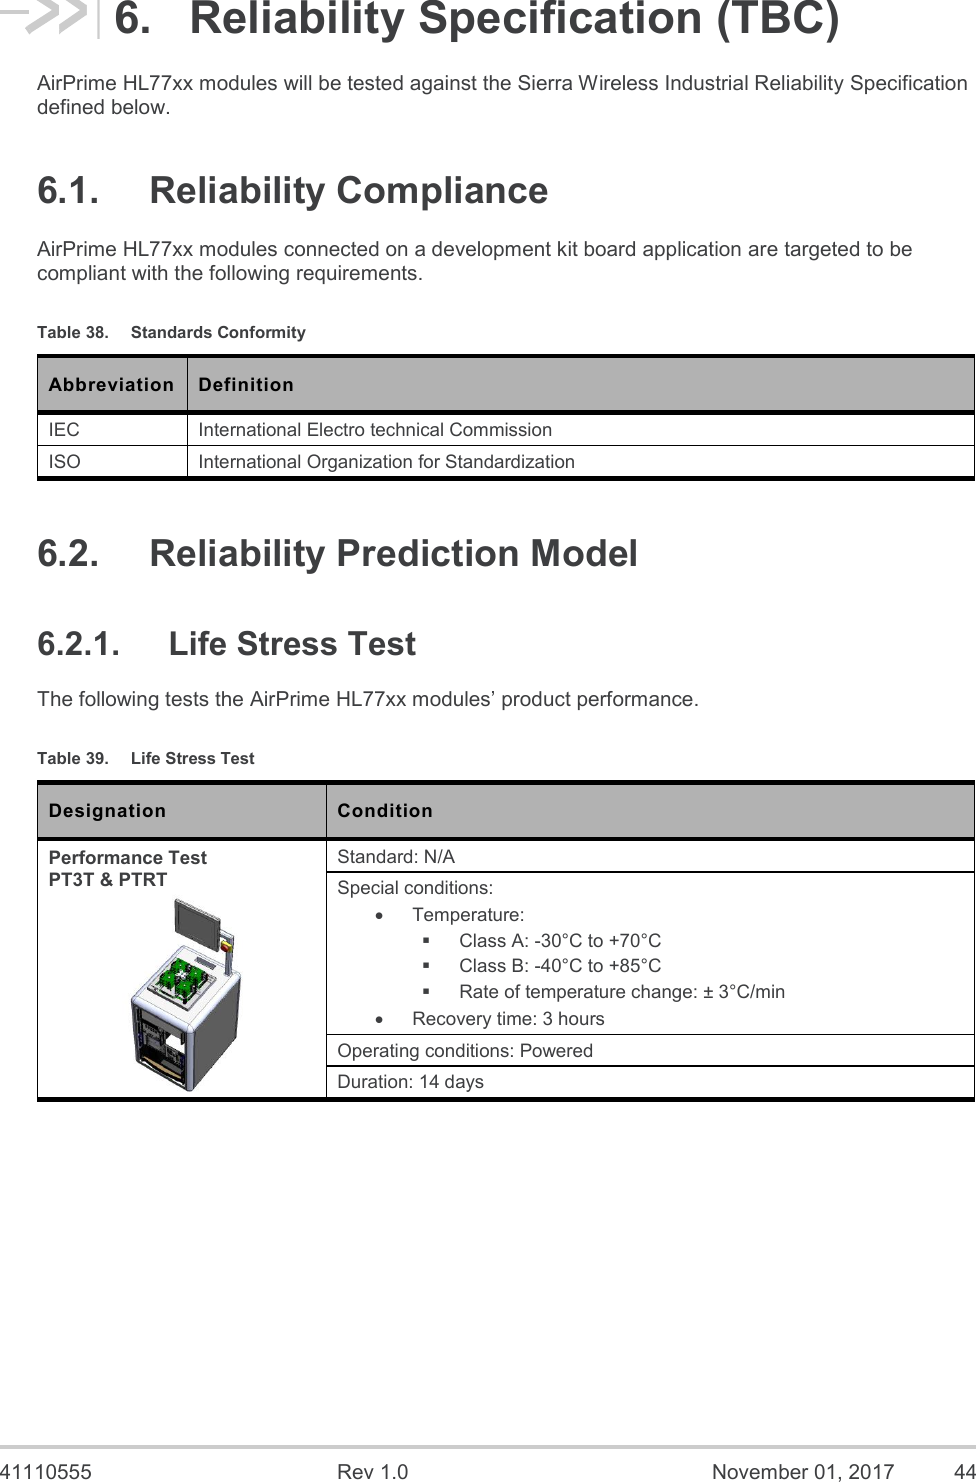  41110555  Rev 1.0  November 01, 2017  44 6.  Reliability Specification (TBC) AirPrime HL77xx modules will be tested against the Sierra Wireless Industrial Reliability Specification defined below. 6.1.  Reliability Compliance AirPrime HL77xx modules connected on a development kit board application are targeted to be compliant with the following requirements. Table 38.  Standards Conformity Abbreviation Definition IEC International Electro technical Commission  ISO  International Organization for Standardization 6.2.  Reliability Prediction Model 6.2.1.  Life Stress Test The following tests the AirPrime HL77xx modules’ product performance. Table 39.  Life Stress Test Designation Condition Performance Test PT3T &amp; PTRT  Standard: N/A Special conditions: •  Temperature: ▪  Class A: -30°C to +70°C ▪  Class B: -40°C to +85°C ▪  Rate of temperature change: ± 3°C/min •  Recovery time: 3 hours Operating conditions: Powered Duration: 14 days 